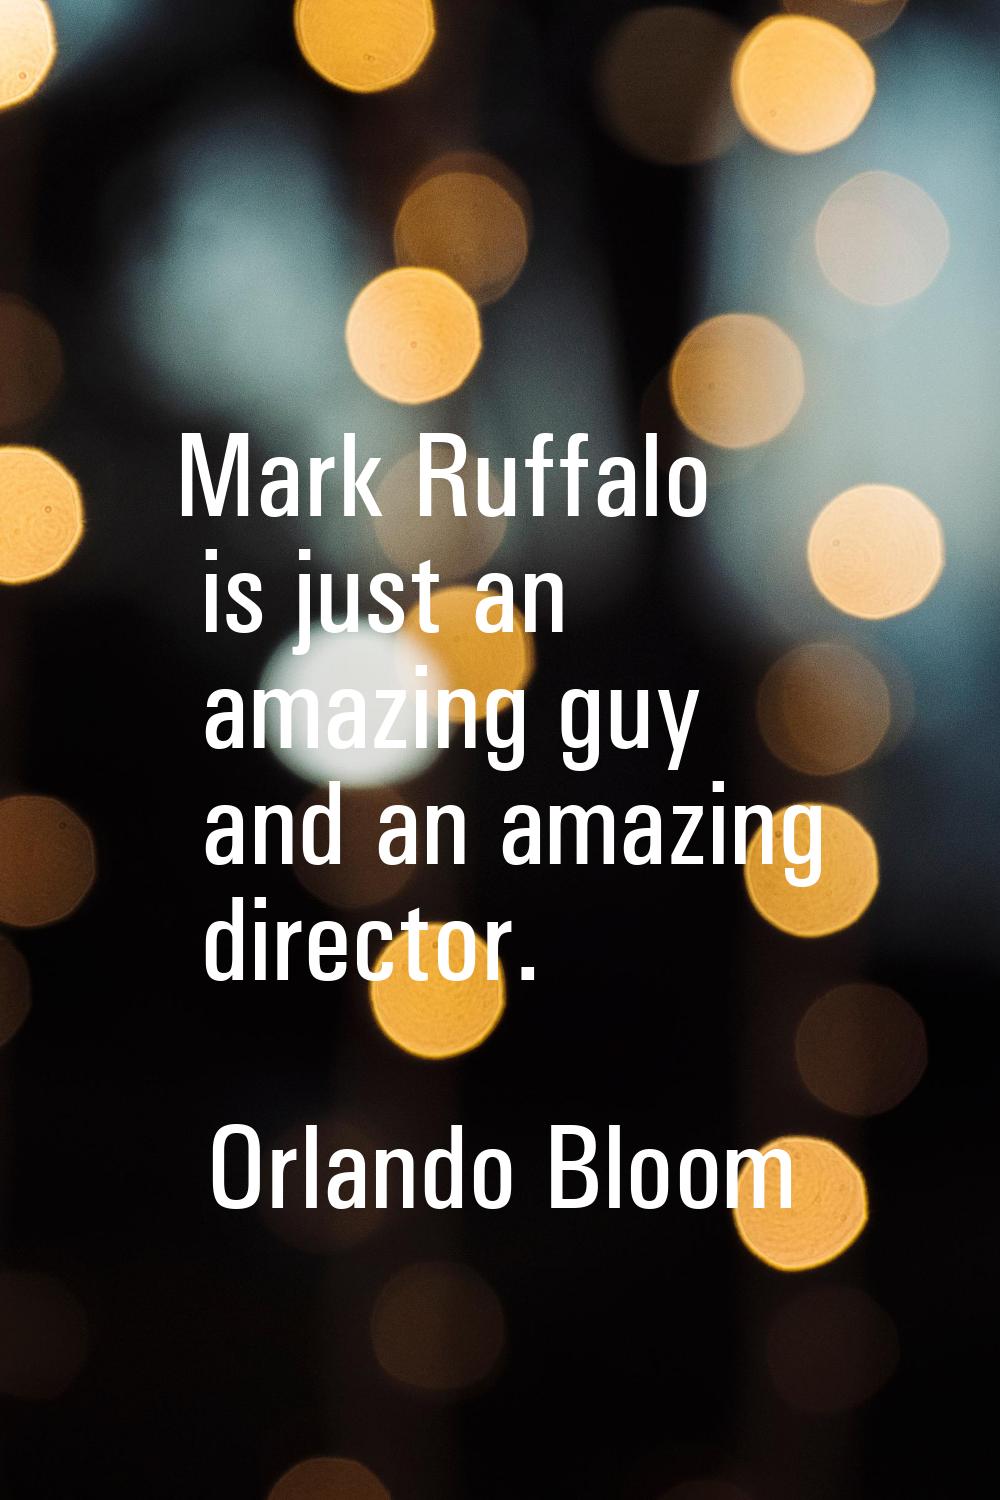 Mark Ruffalo is just an amazing guy and an amazing director.